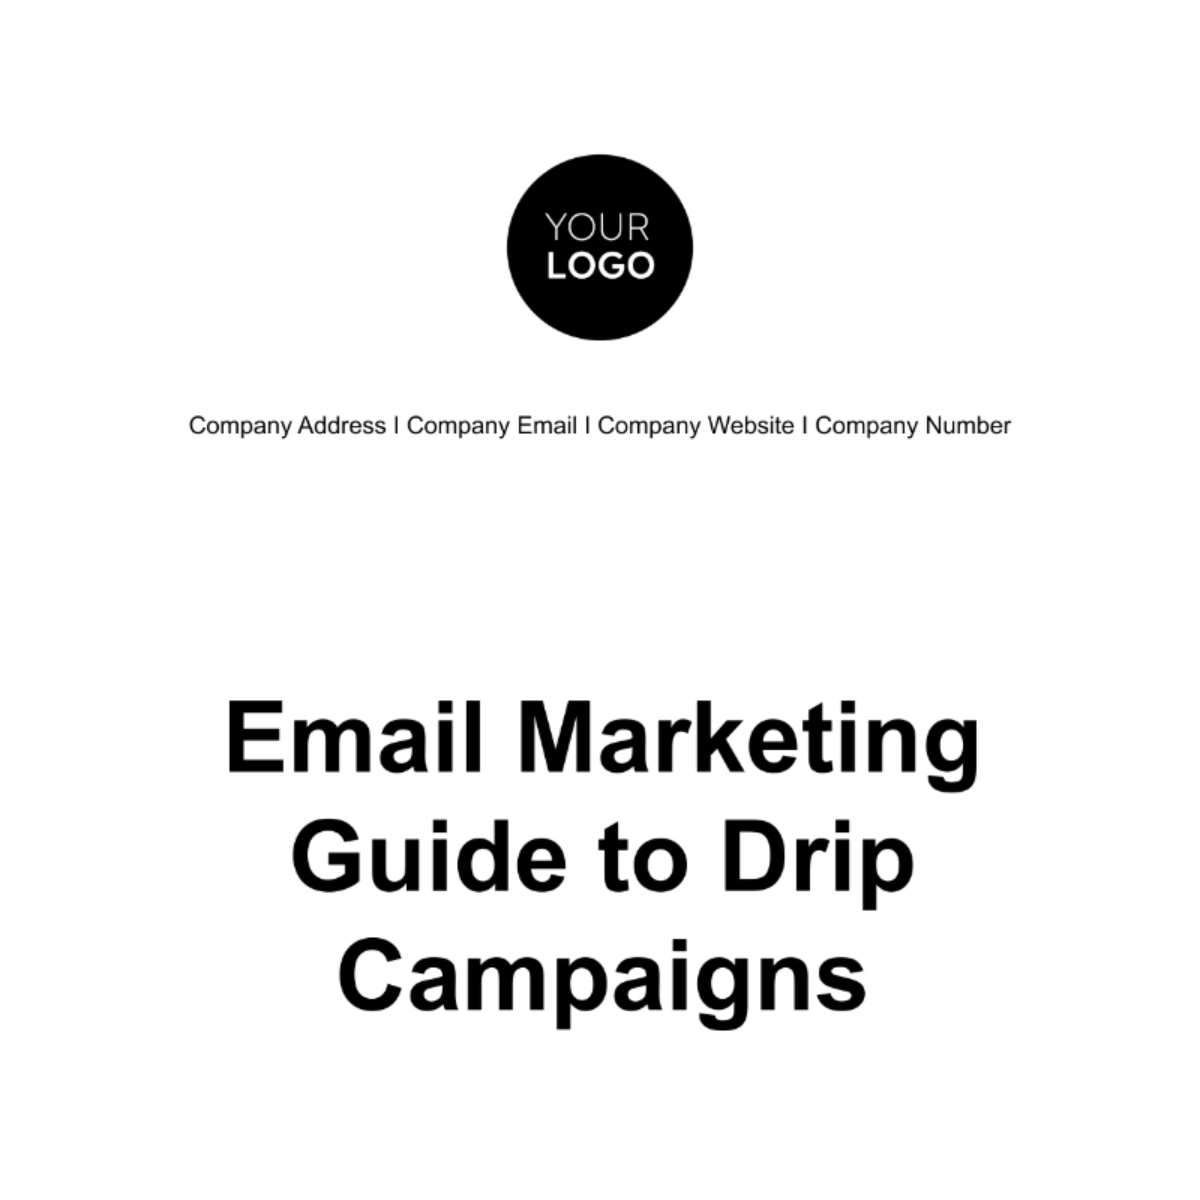 Free Email Marketing Guide to Drip Campaigns Template